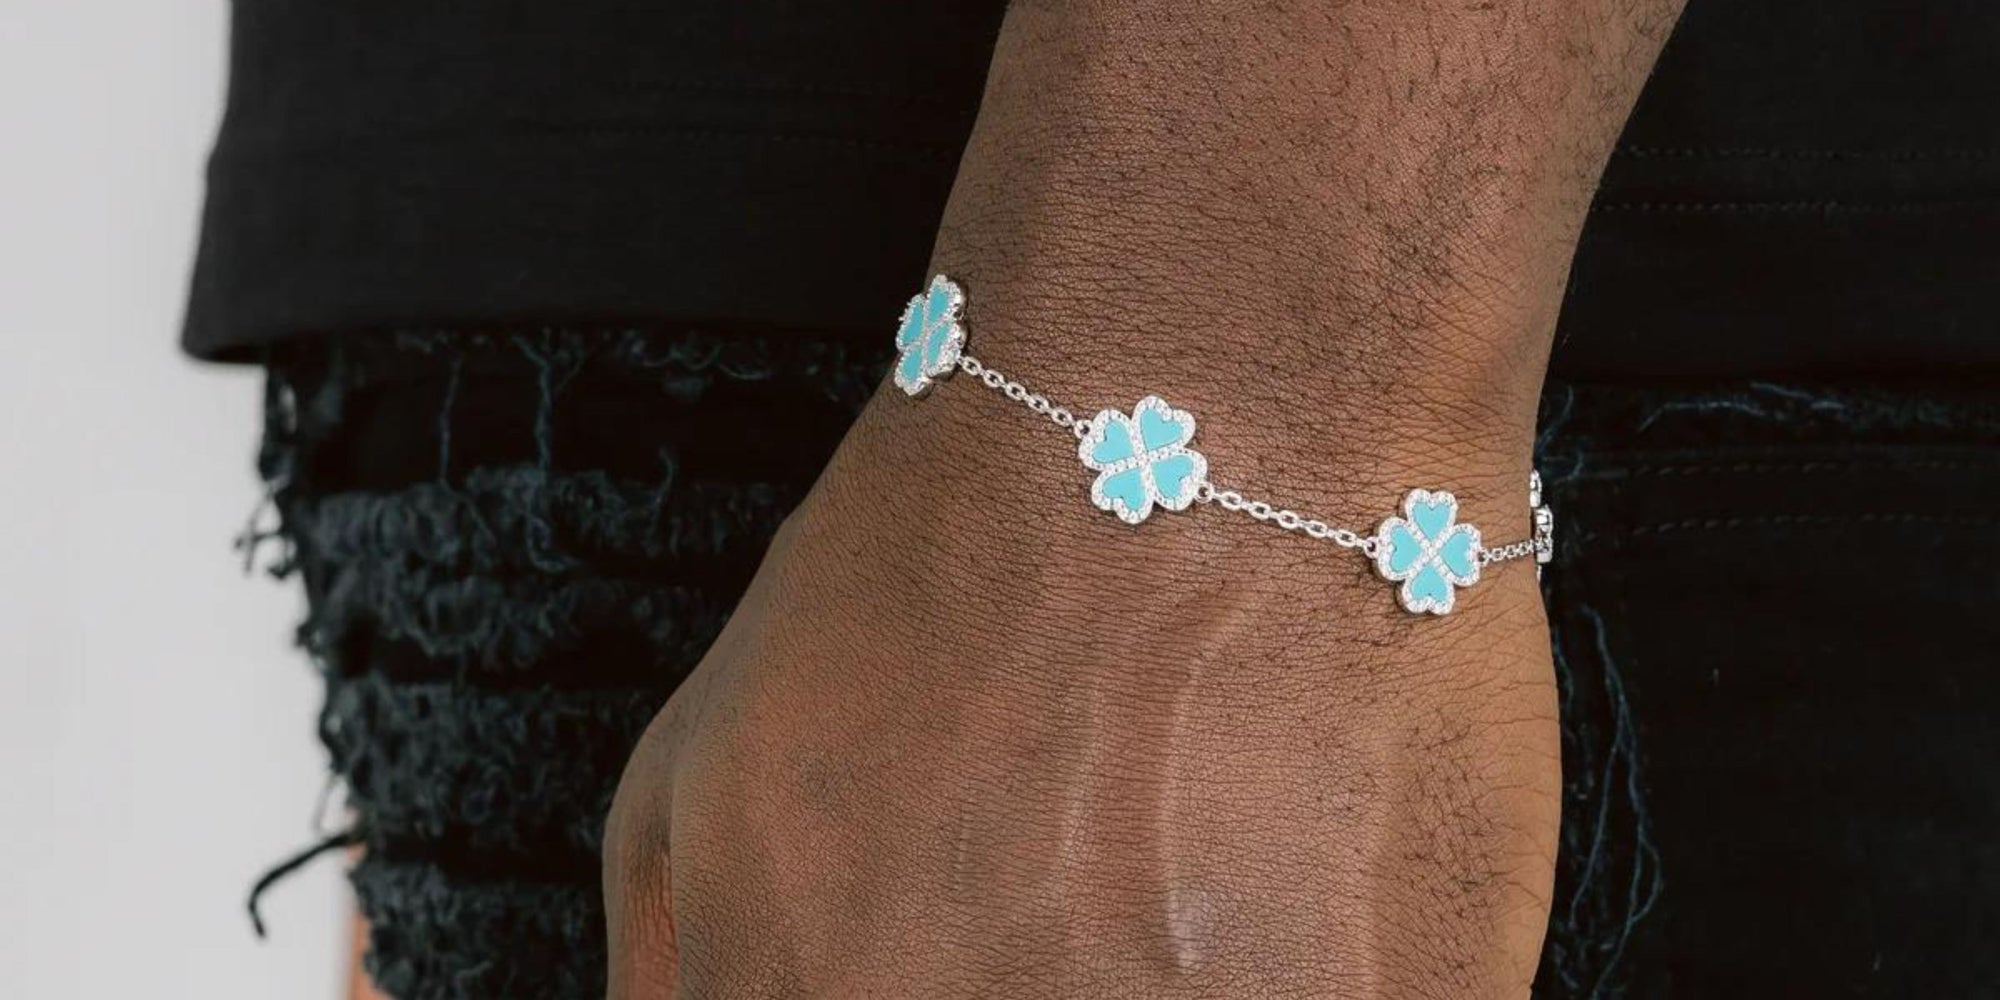 Clover Bracelet: Types, Styles and Meaning Behind The Symbol